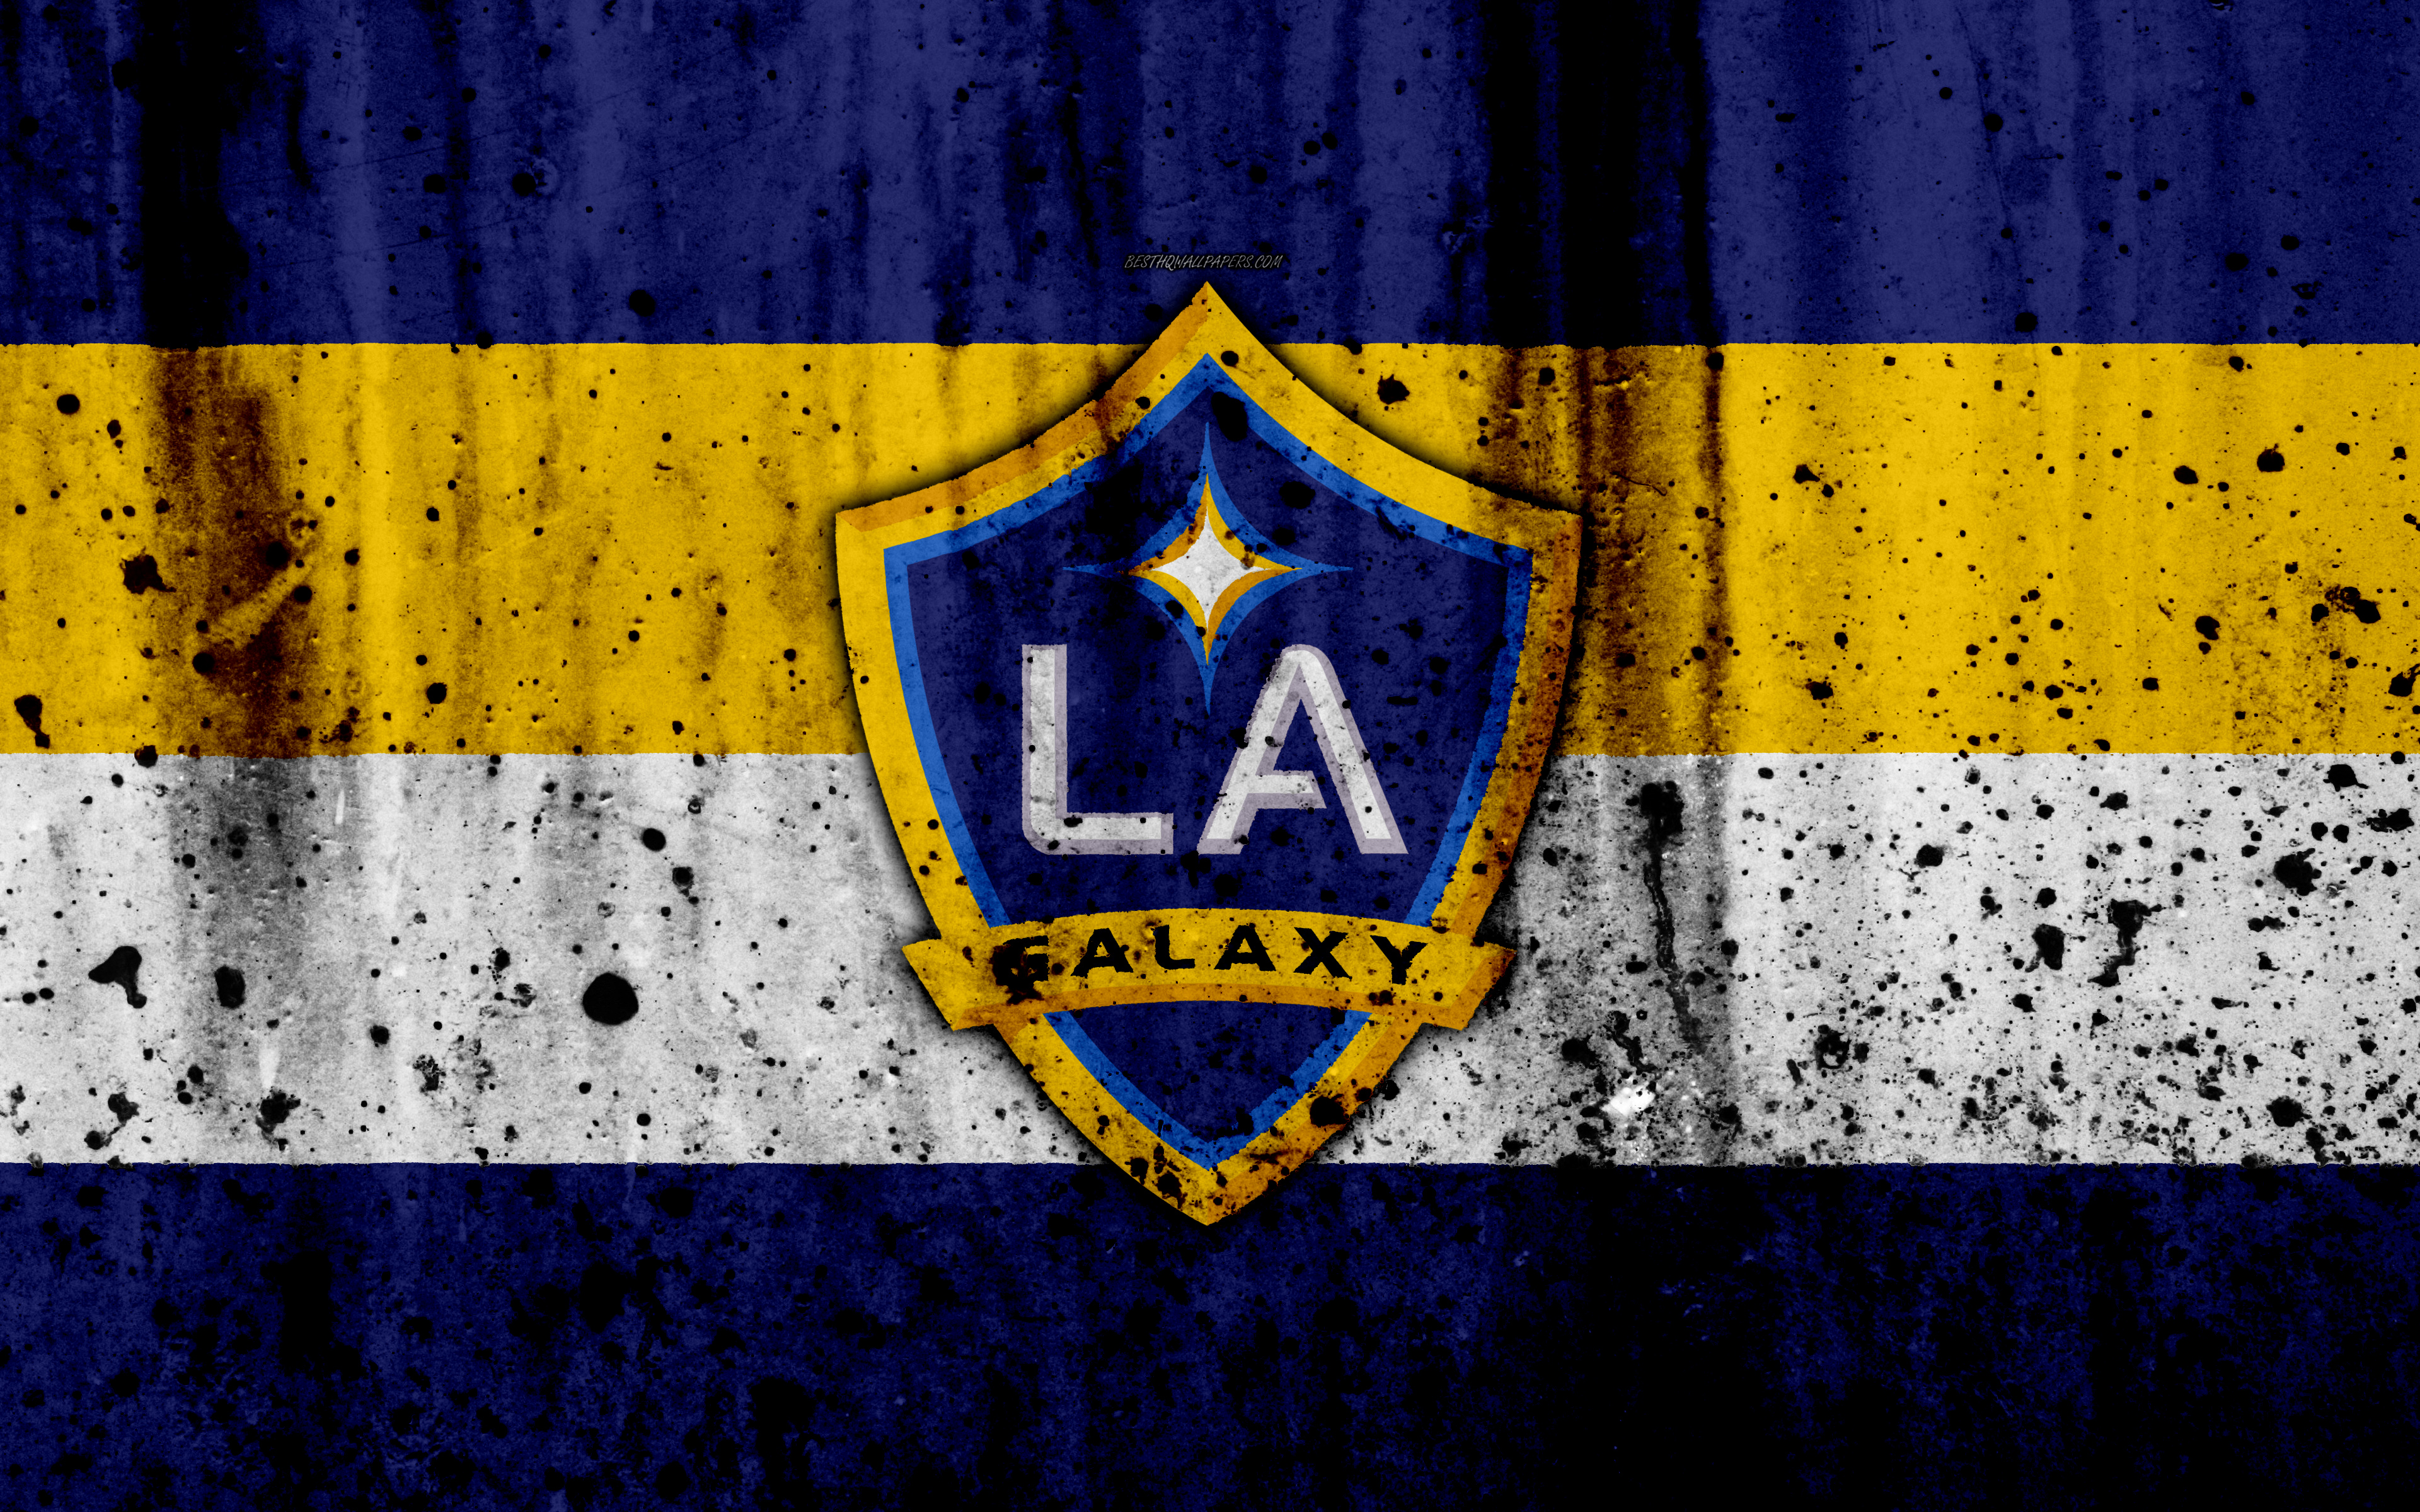 Download wallpaper 4k, FC Los Angeles Galaxy, grunge, MLS, soccer, Western Conference, football club, USA, Los Angeles Galaxy, logo, LA Galaxy, stone texture, Los Angeles Galaxy FC for desktop with resolution 3840x2400